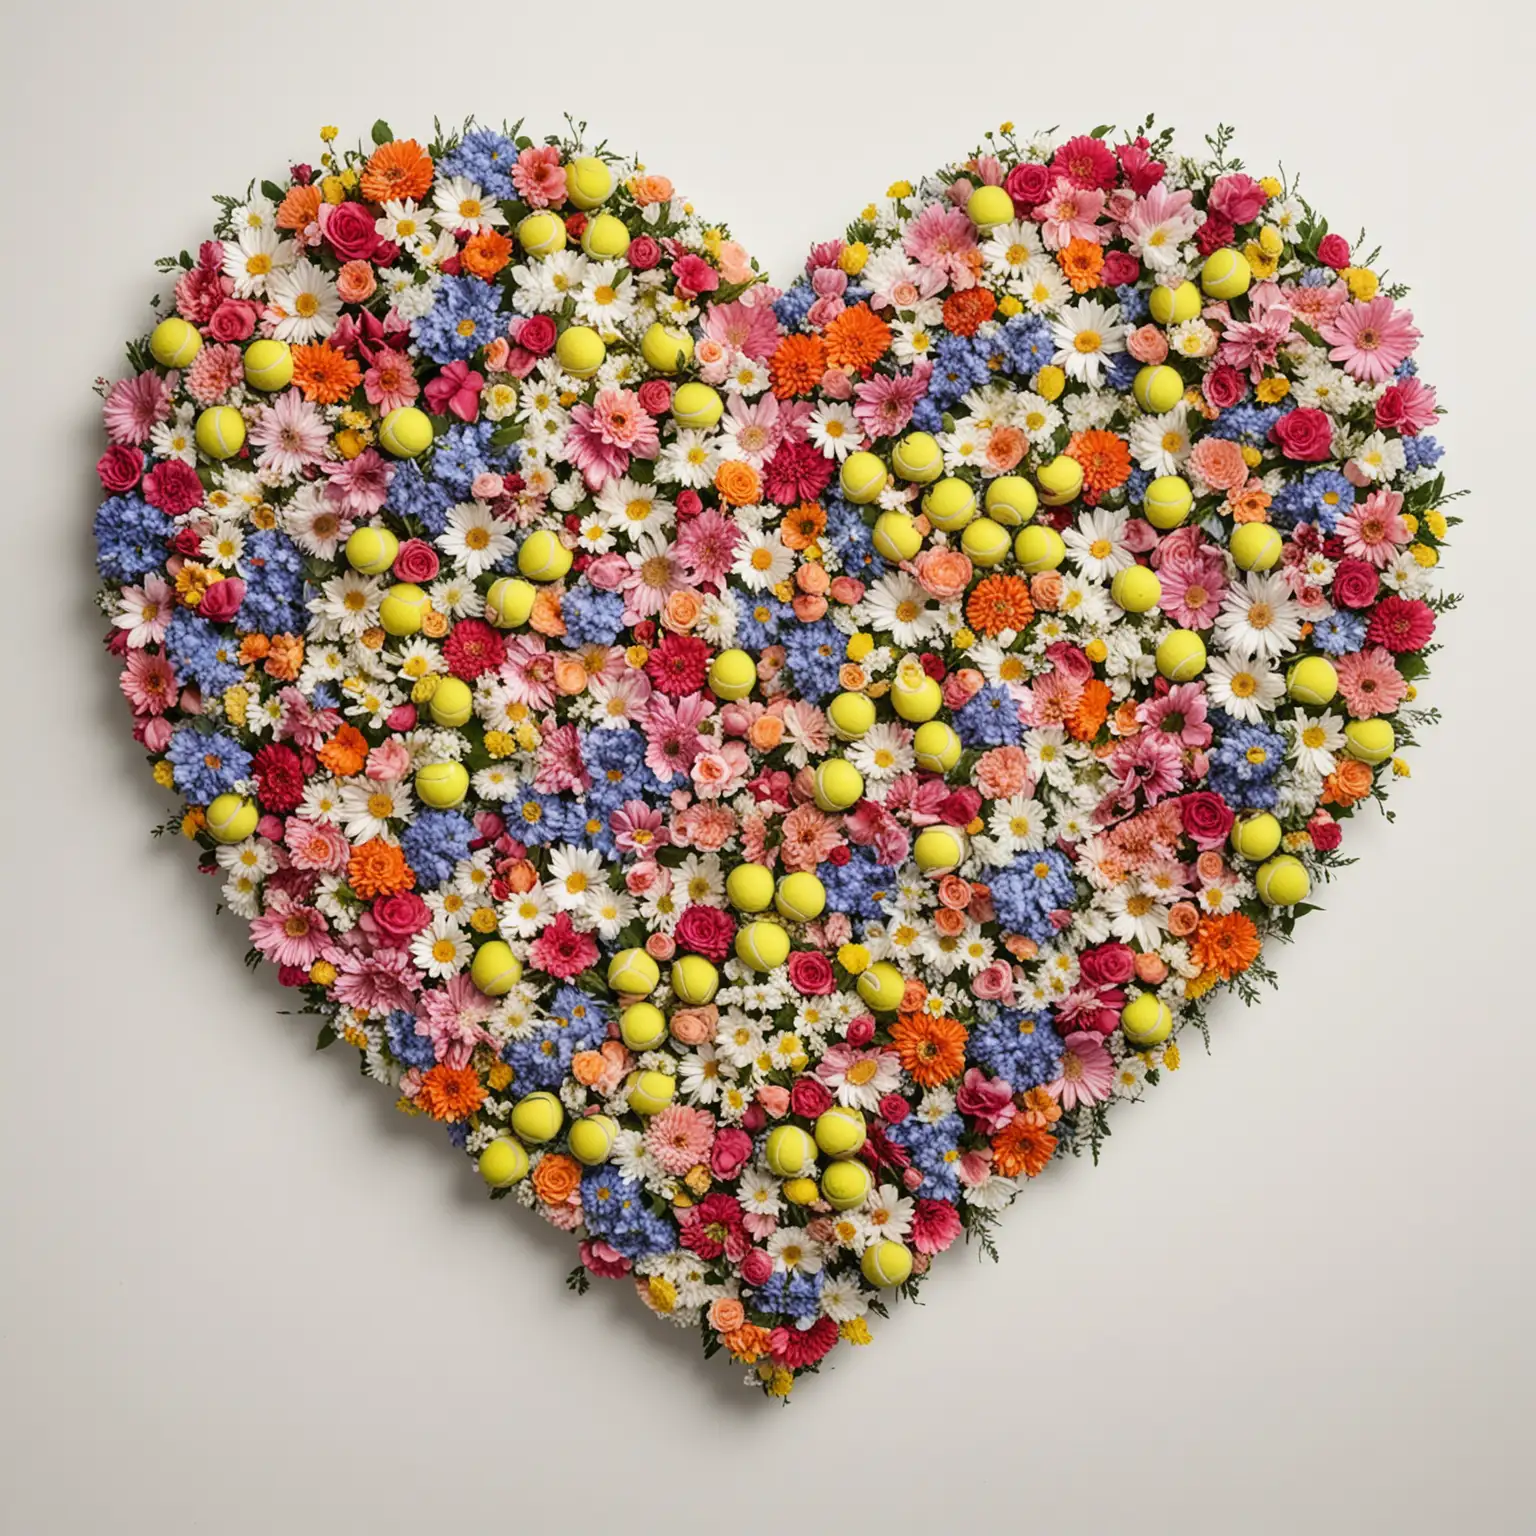 HeartShaped Floral and Tennis Ball Arrangement with Rackets